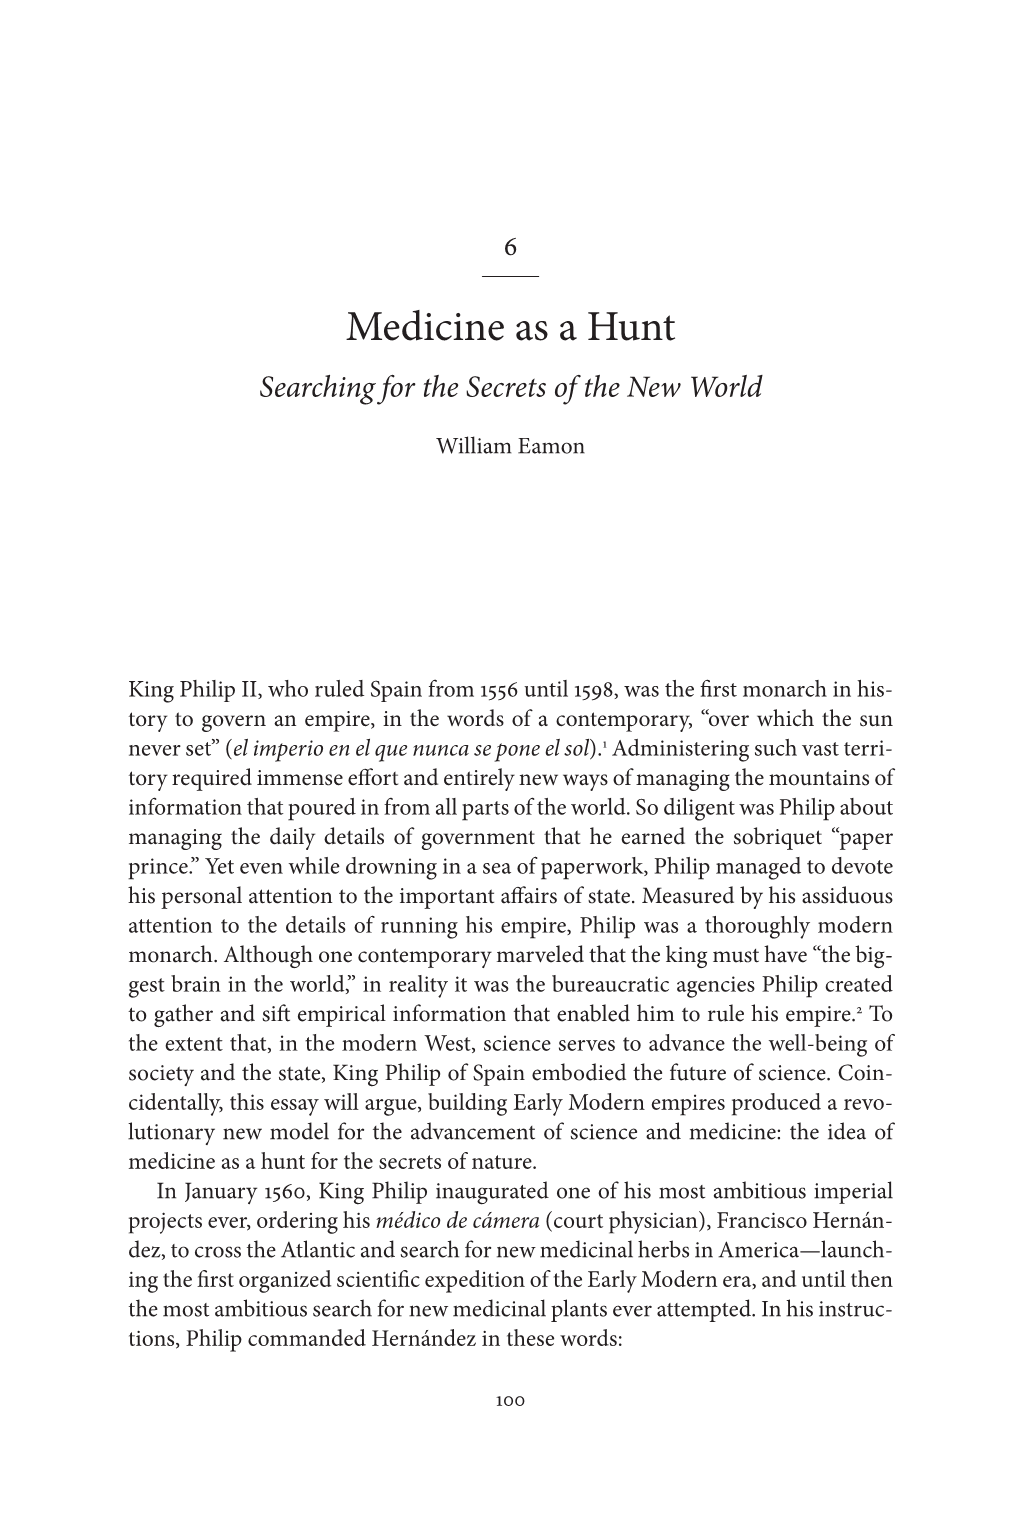 Medicine As a Hunt Searching for the Secrets of the New World